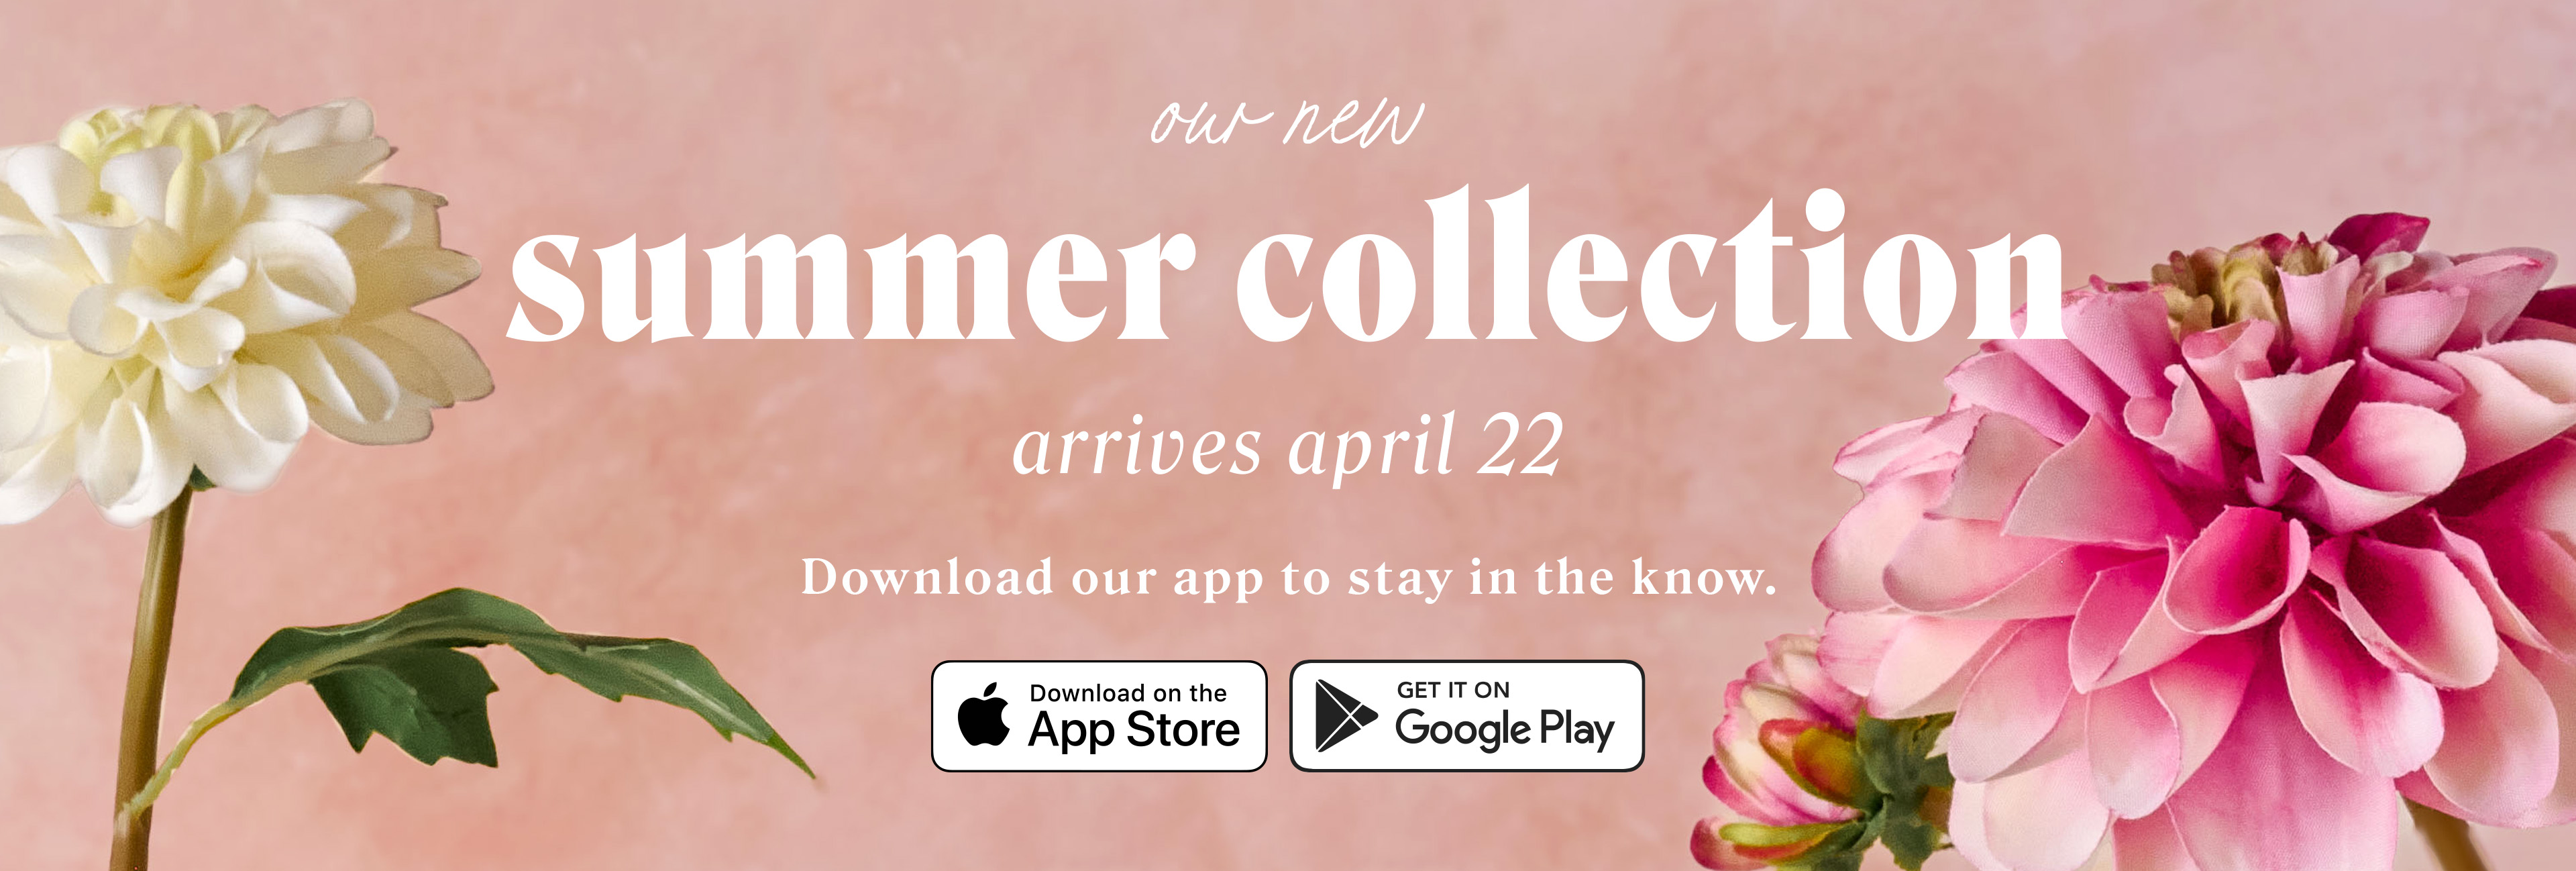 all new summer collection arirves april 22.  download our app to stay in the know.